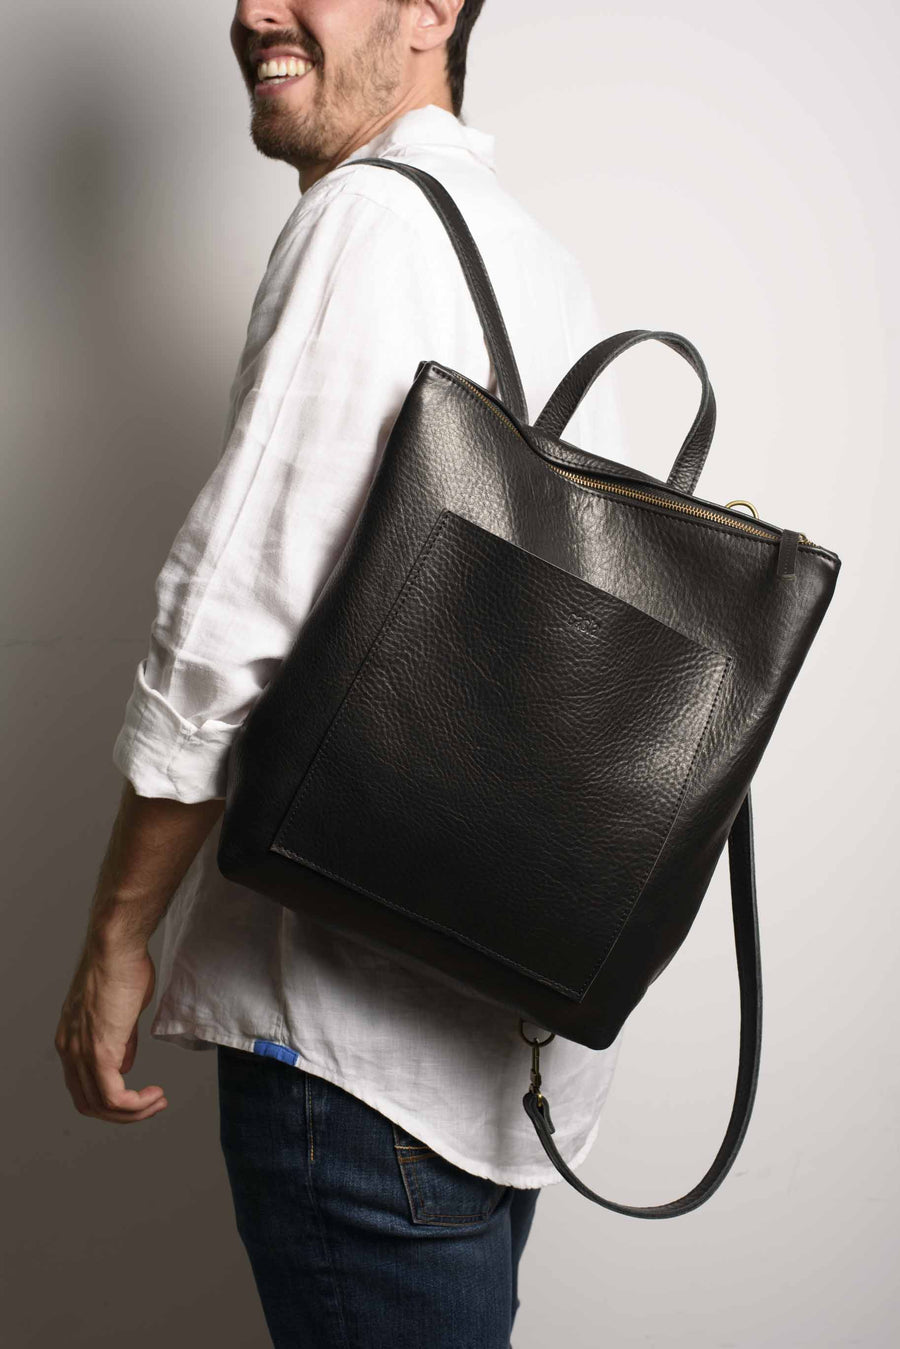 Convertible backpack. Full grain leather backpack. Vegetable tanned leather backpack. Laptop backpack. Unlined backpack.